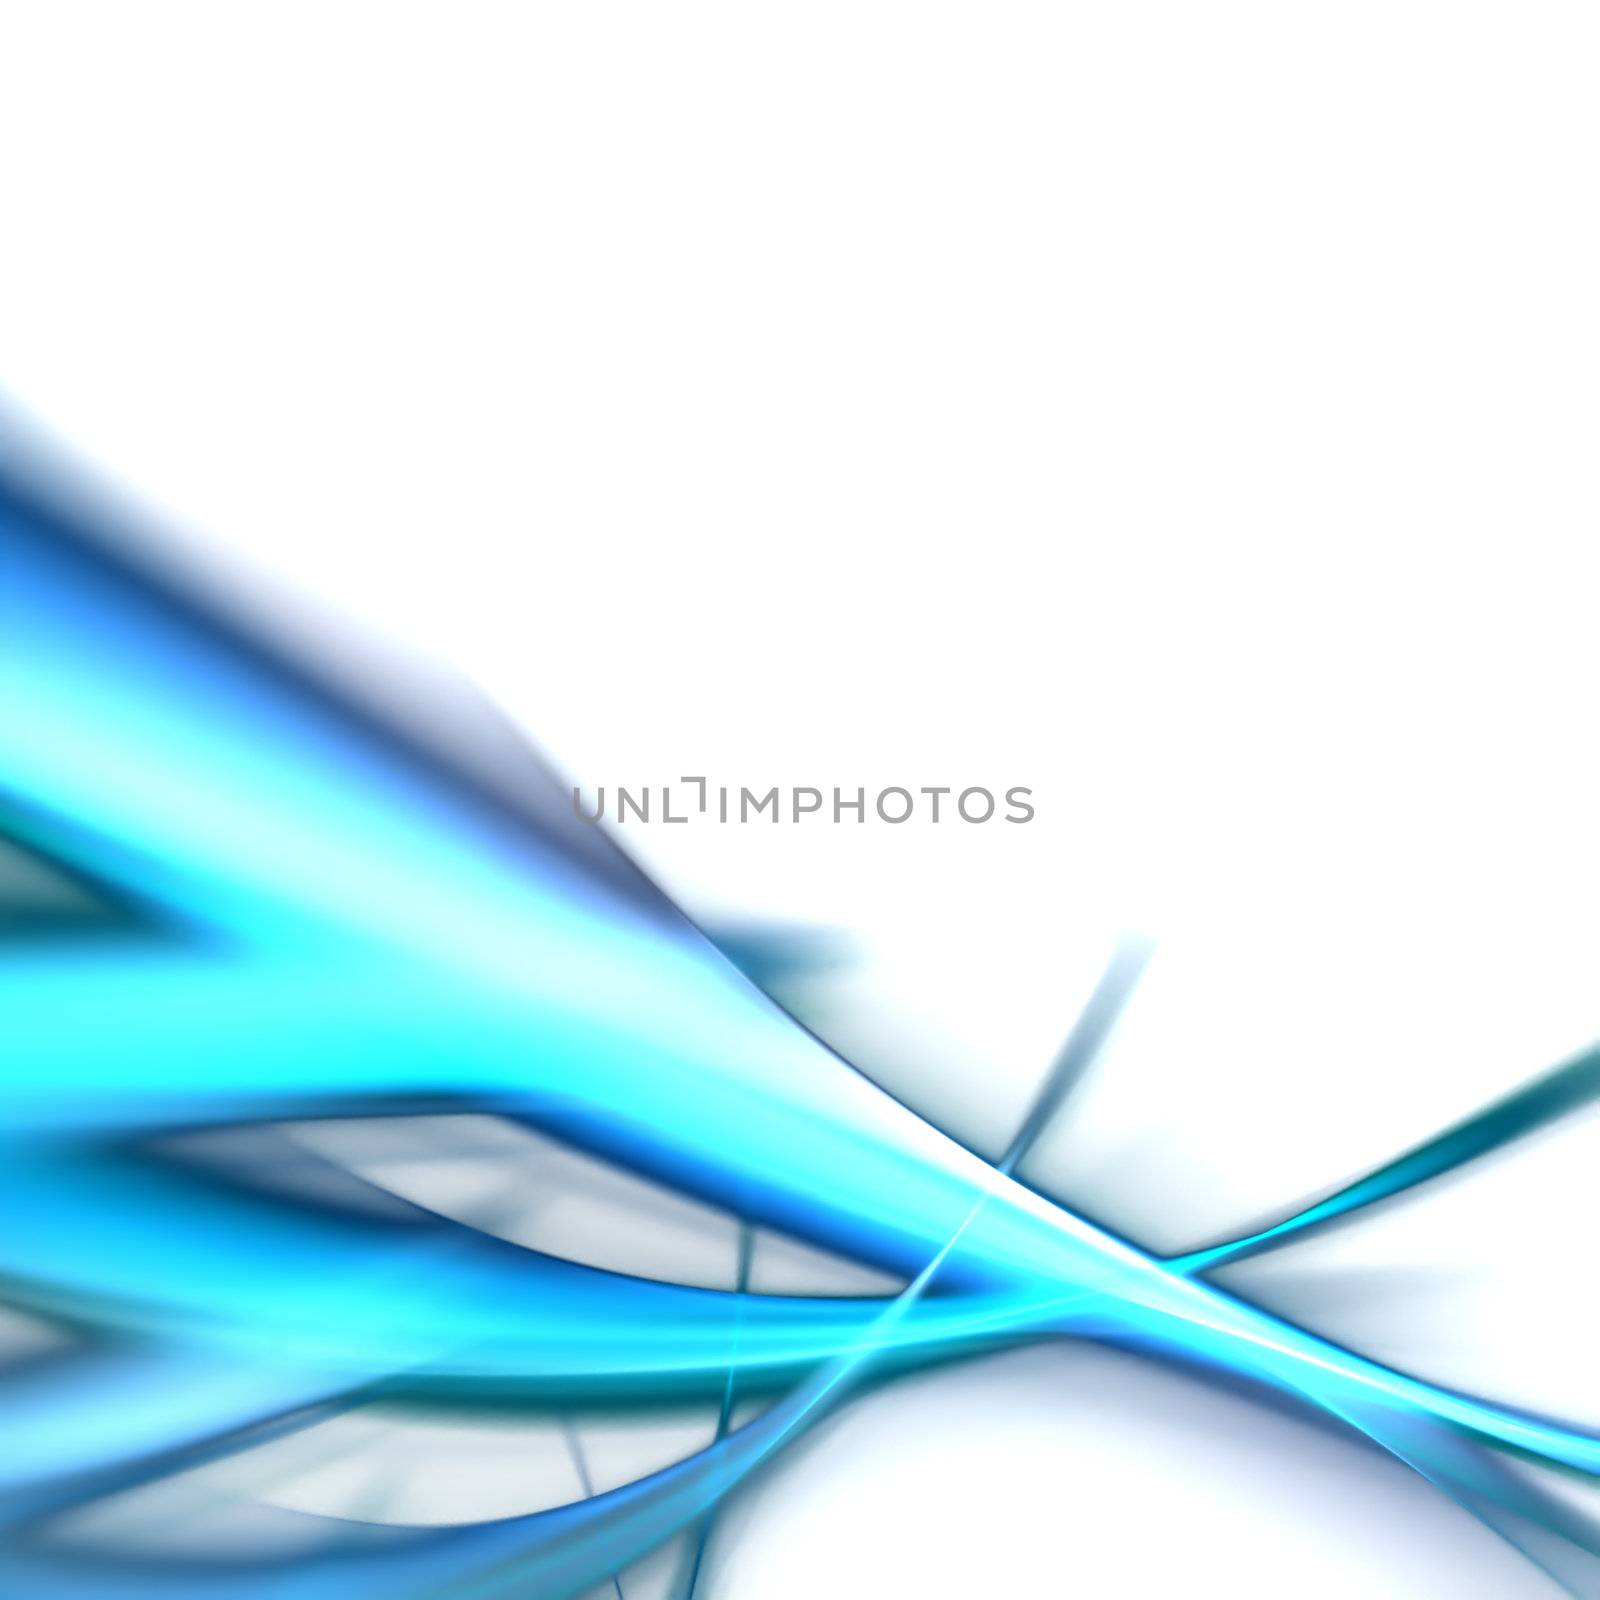 A neon blue abstract fractal background isolated on white.